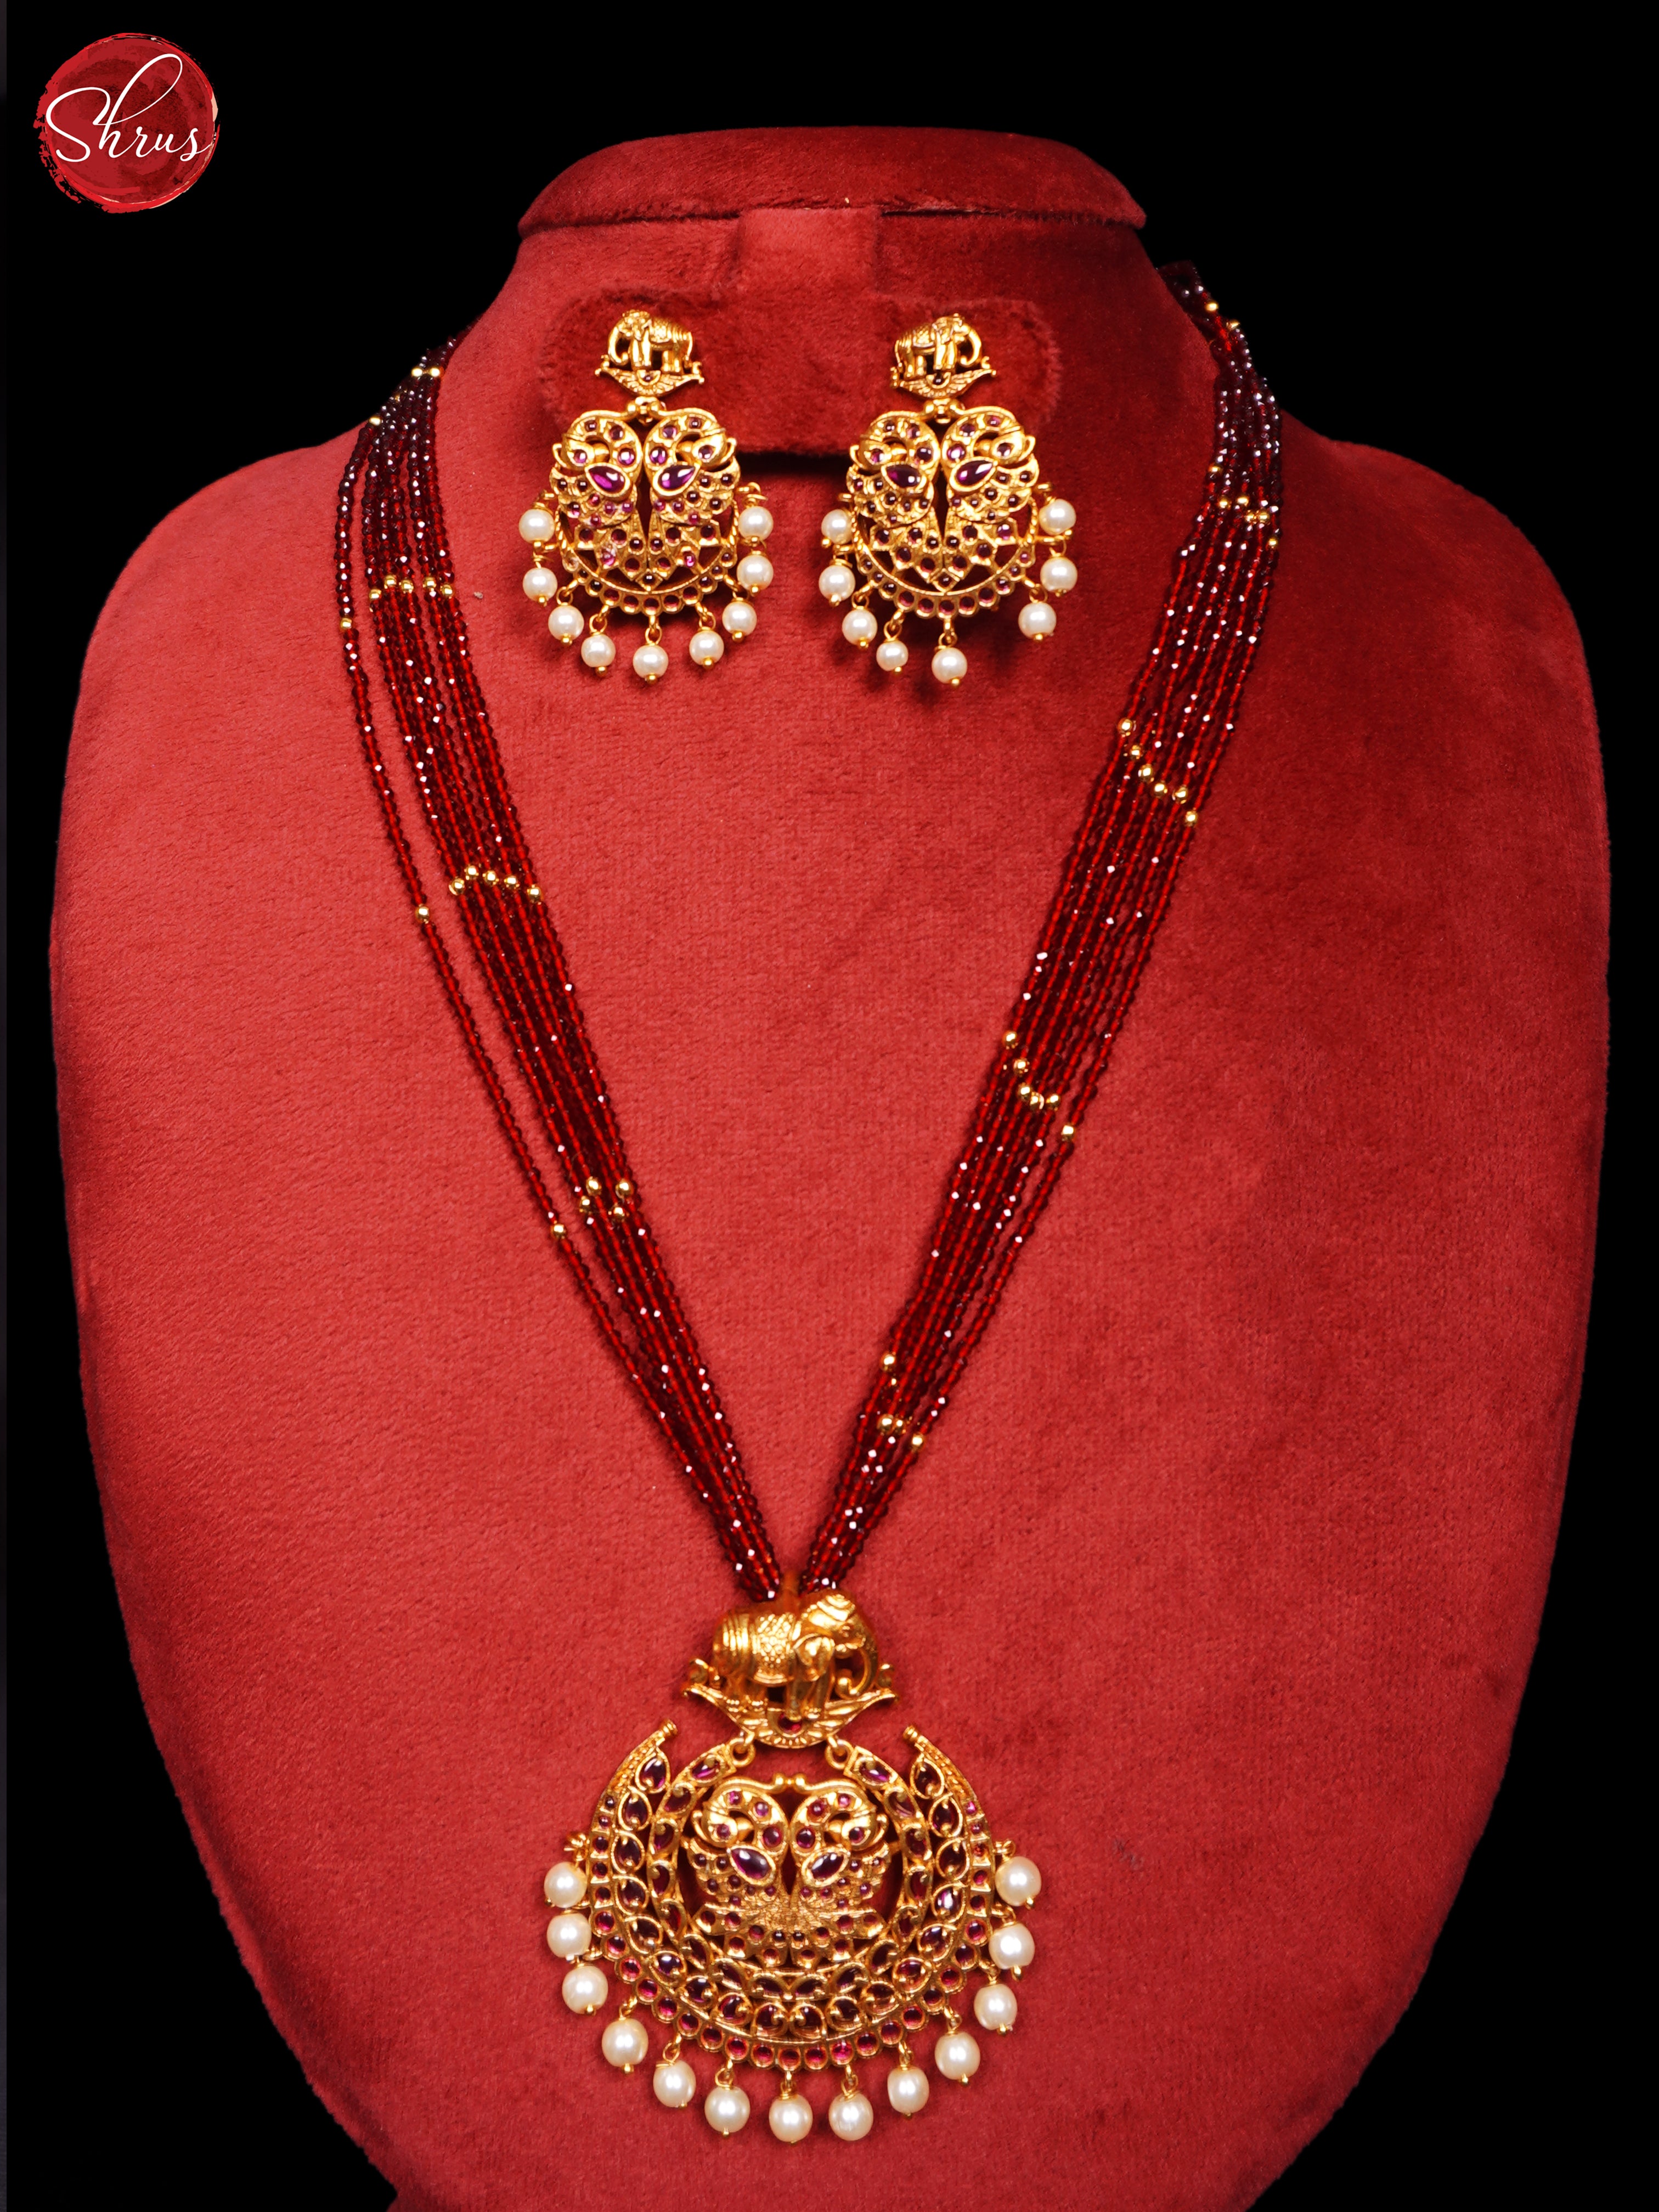 Crystal Beads with gold plated Pendant - NECK PIECE & EARRINGS - Shop on ShrusEternity.com